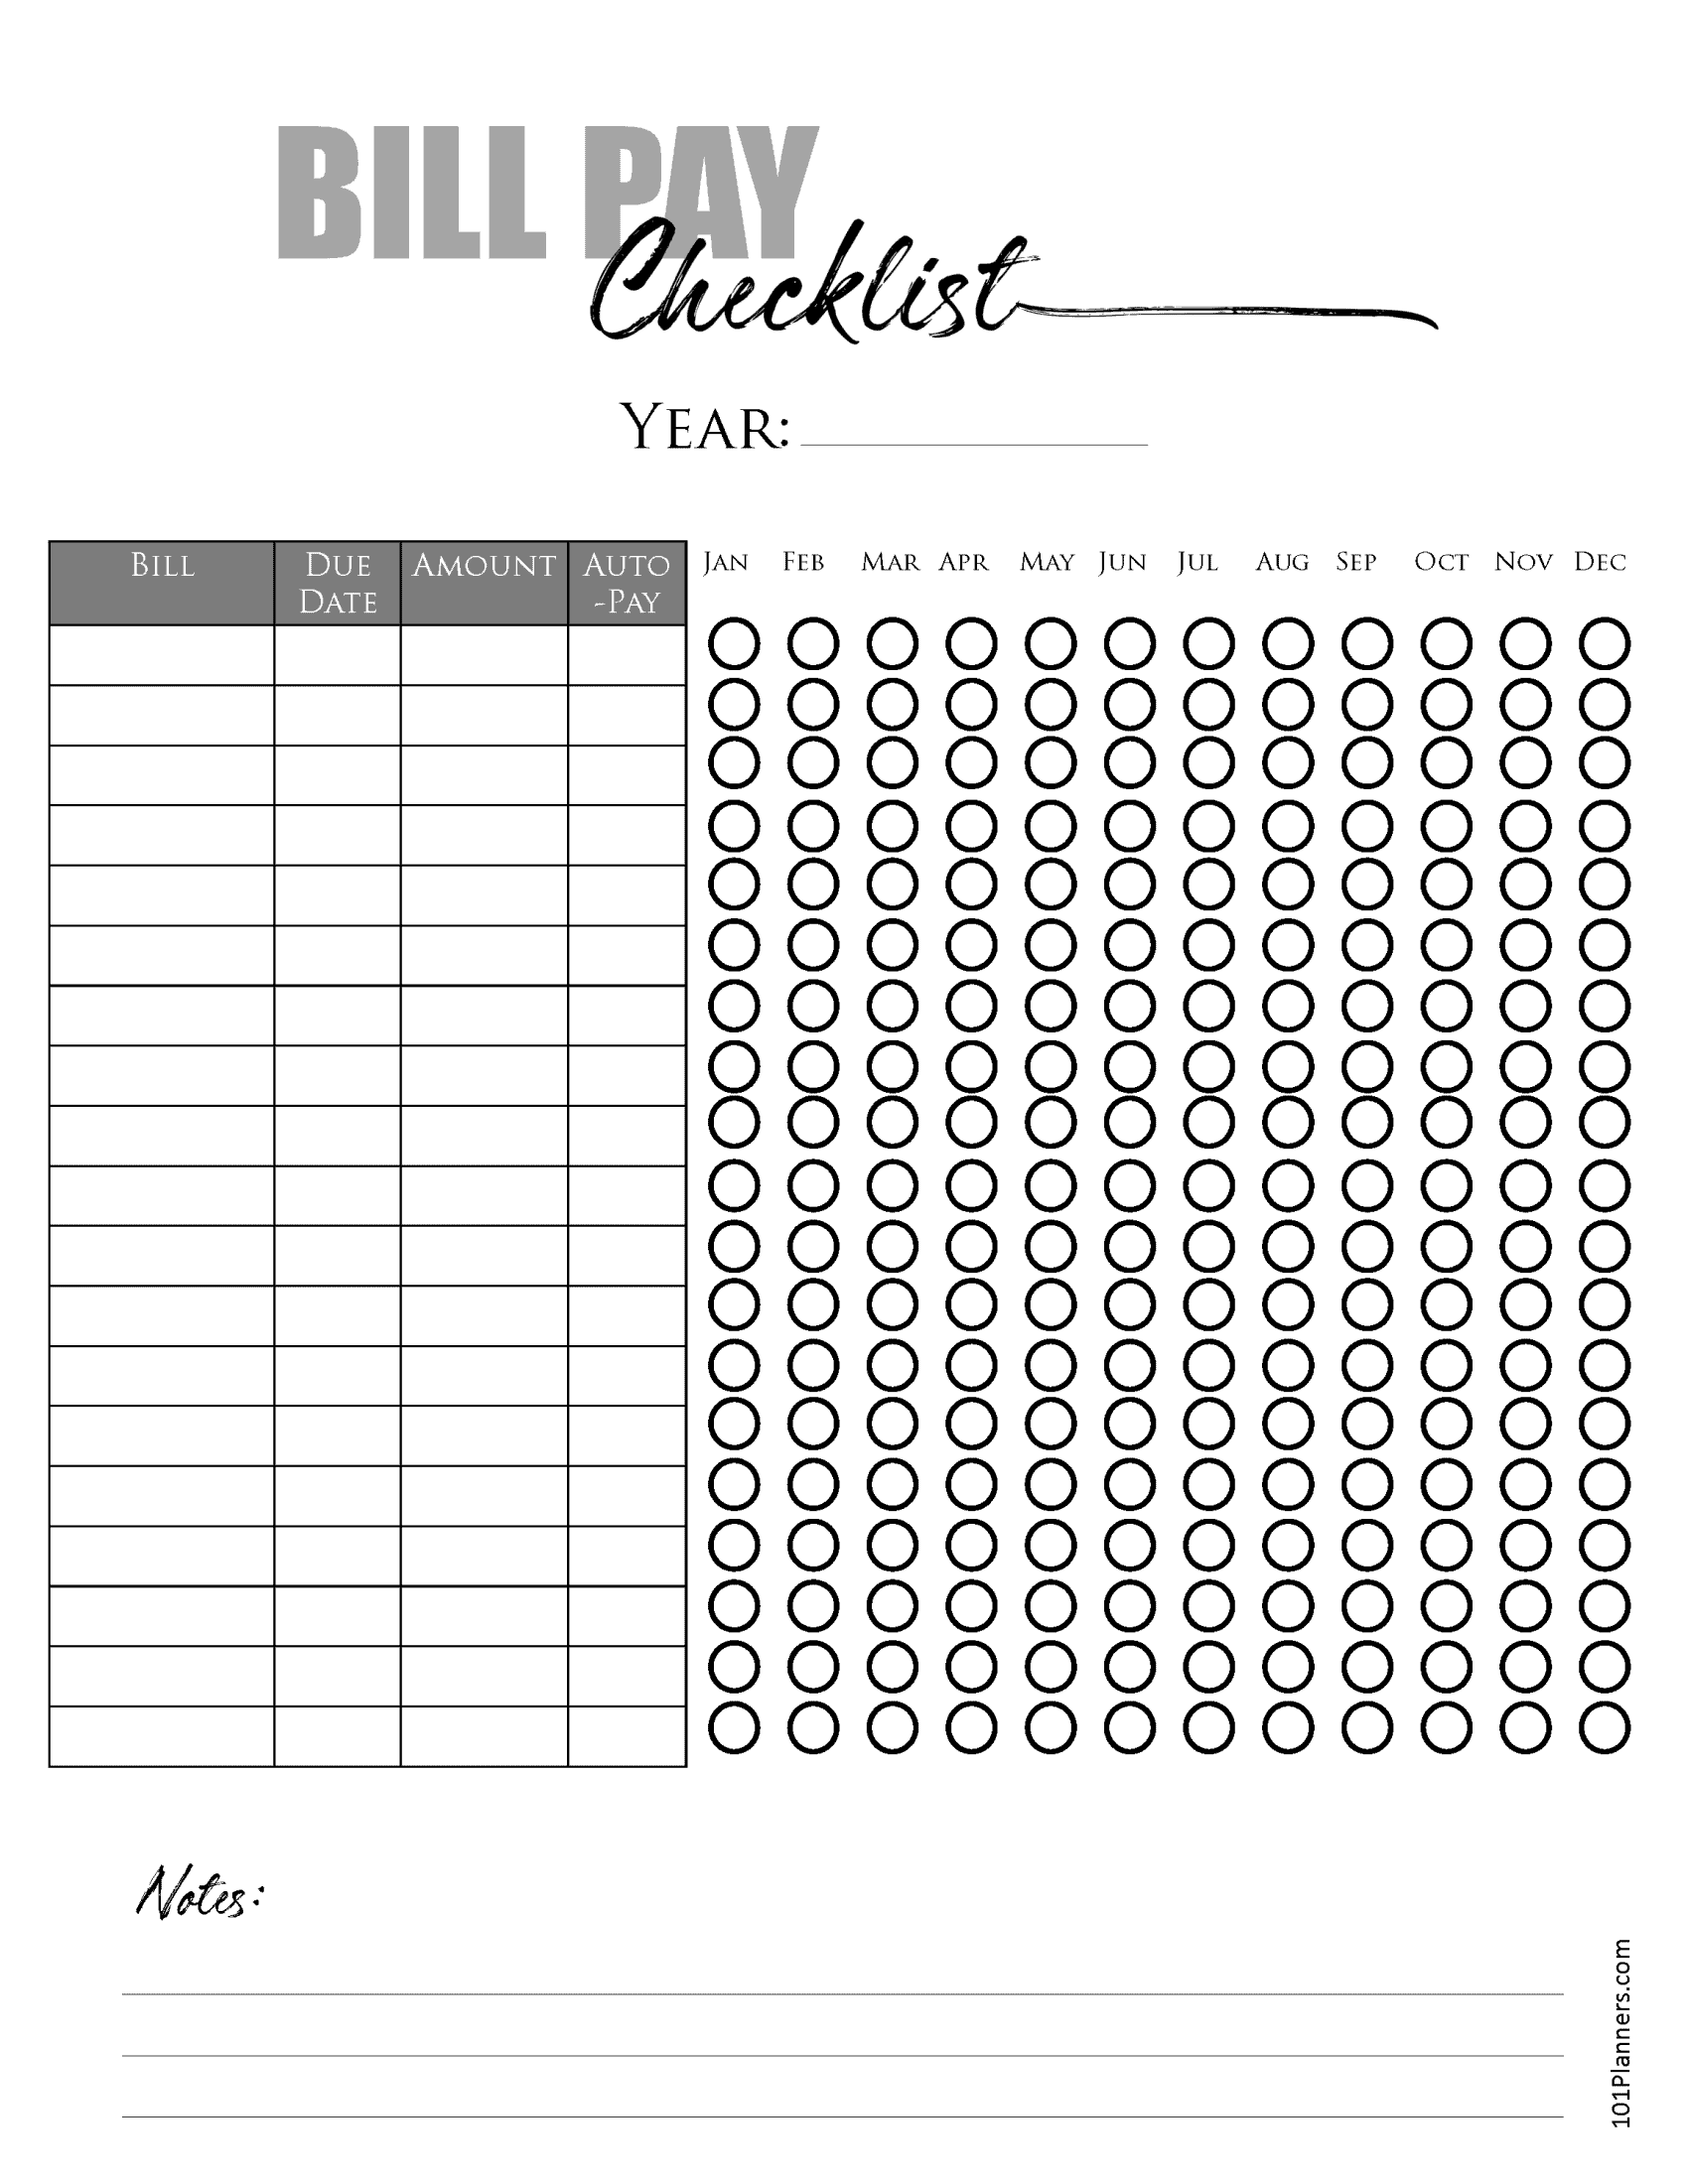 Bill Pay Checklist Template from www.101planners.com